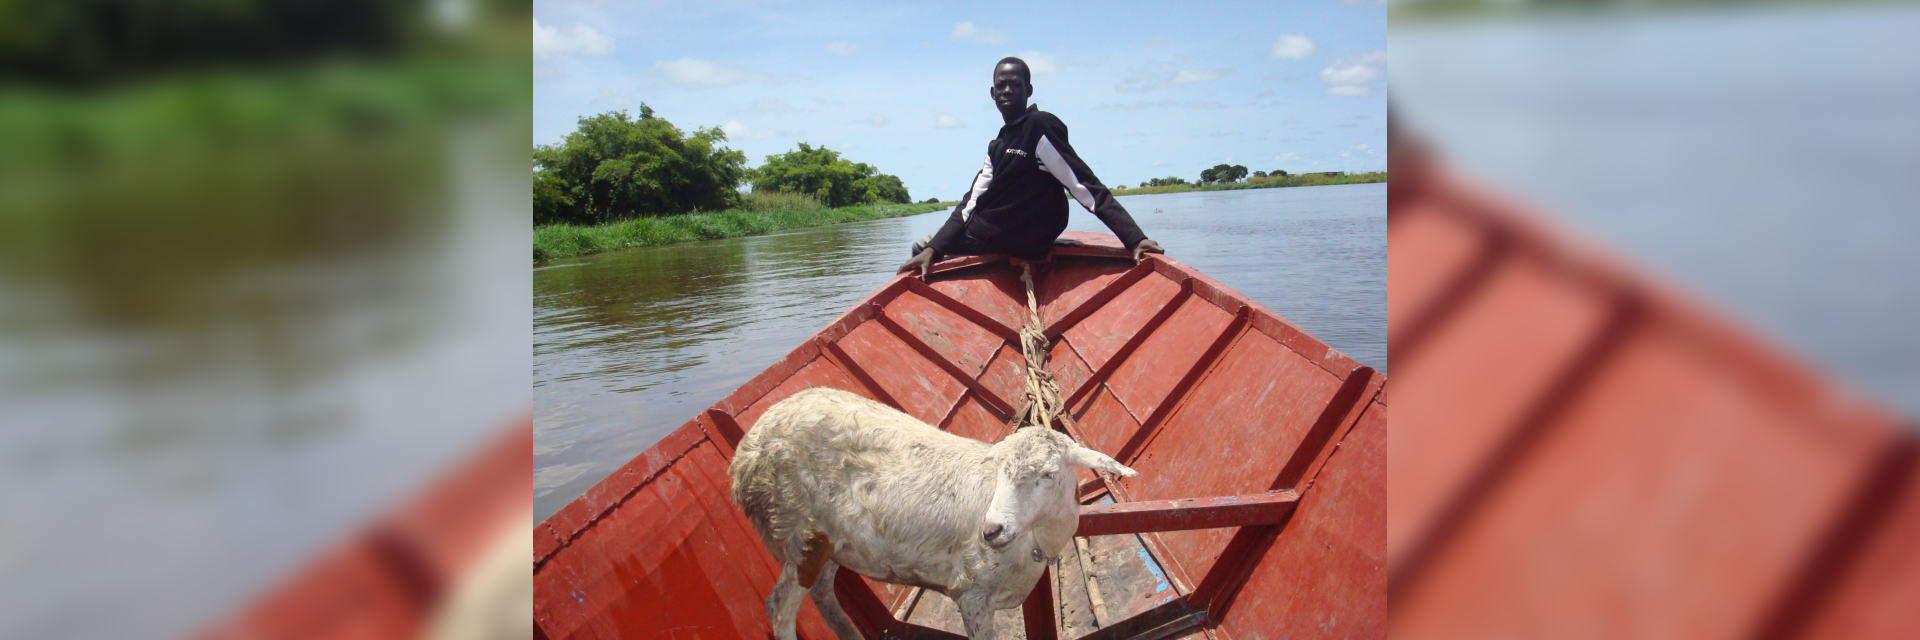 African man on the edge of the boat with live goat